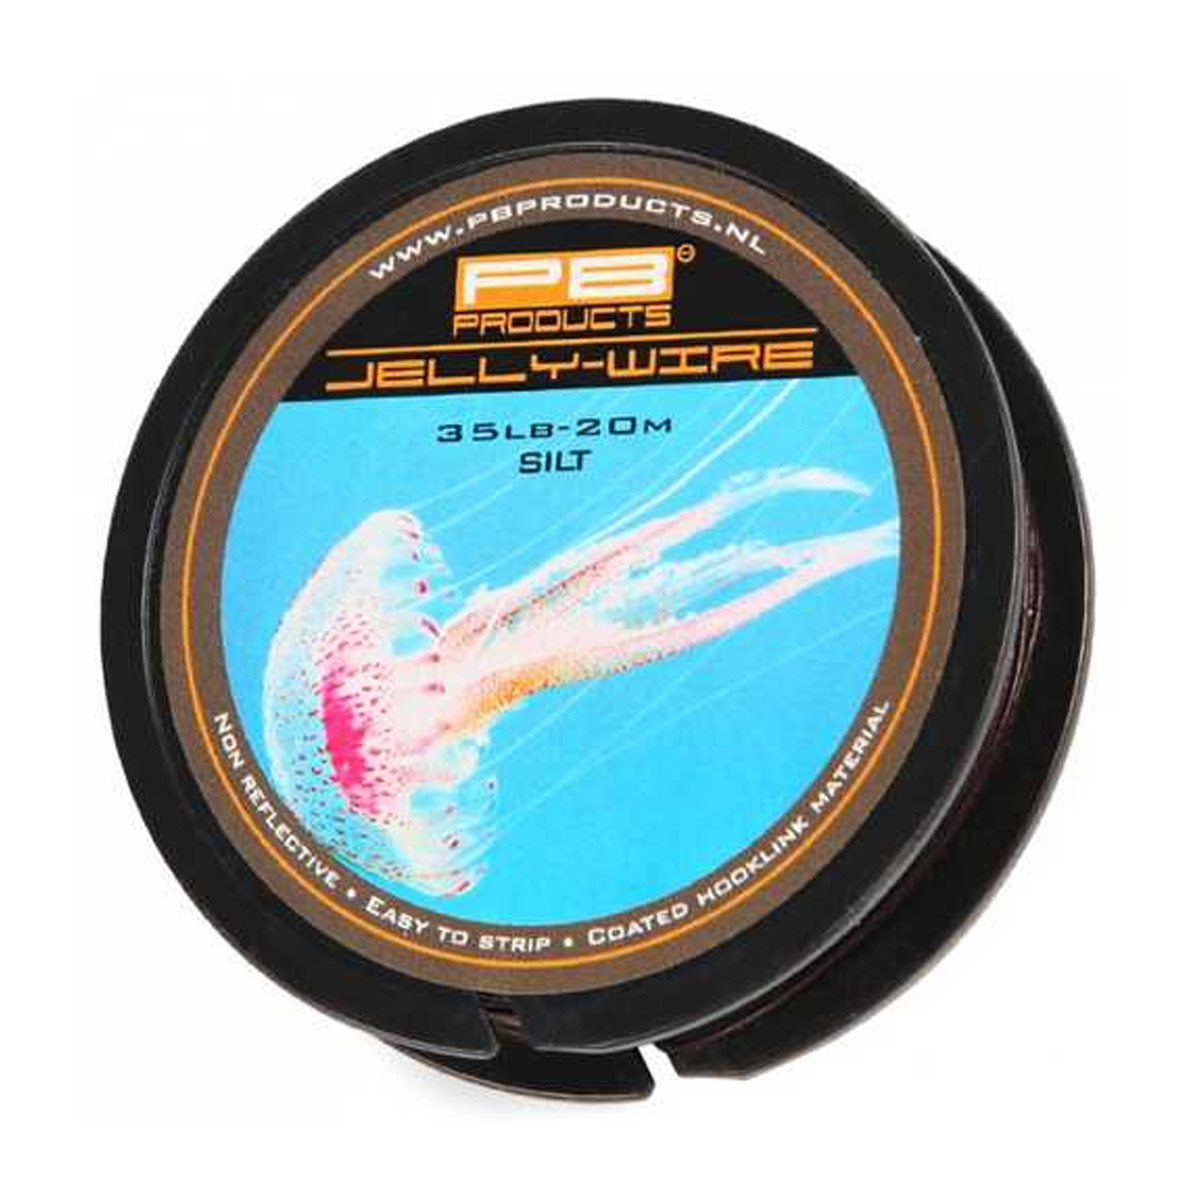 PB Products Jelly Wire Silt -  15 lbs -  25 lbs -  35 lbs